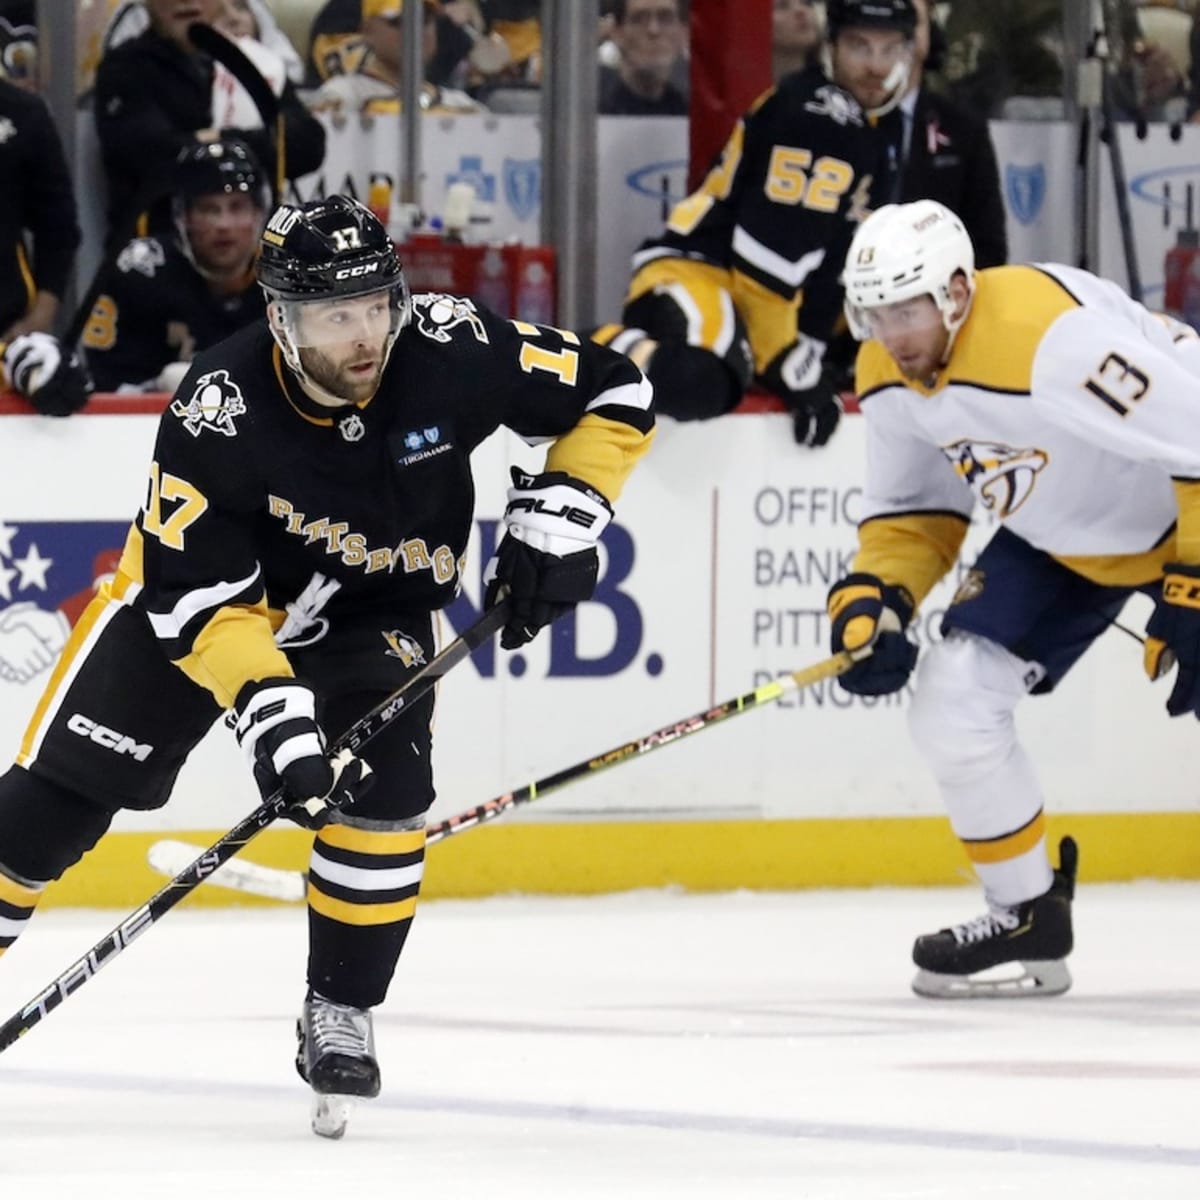 Bryan Rust keeps proving his value for Penguins - PensBurgh